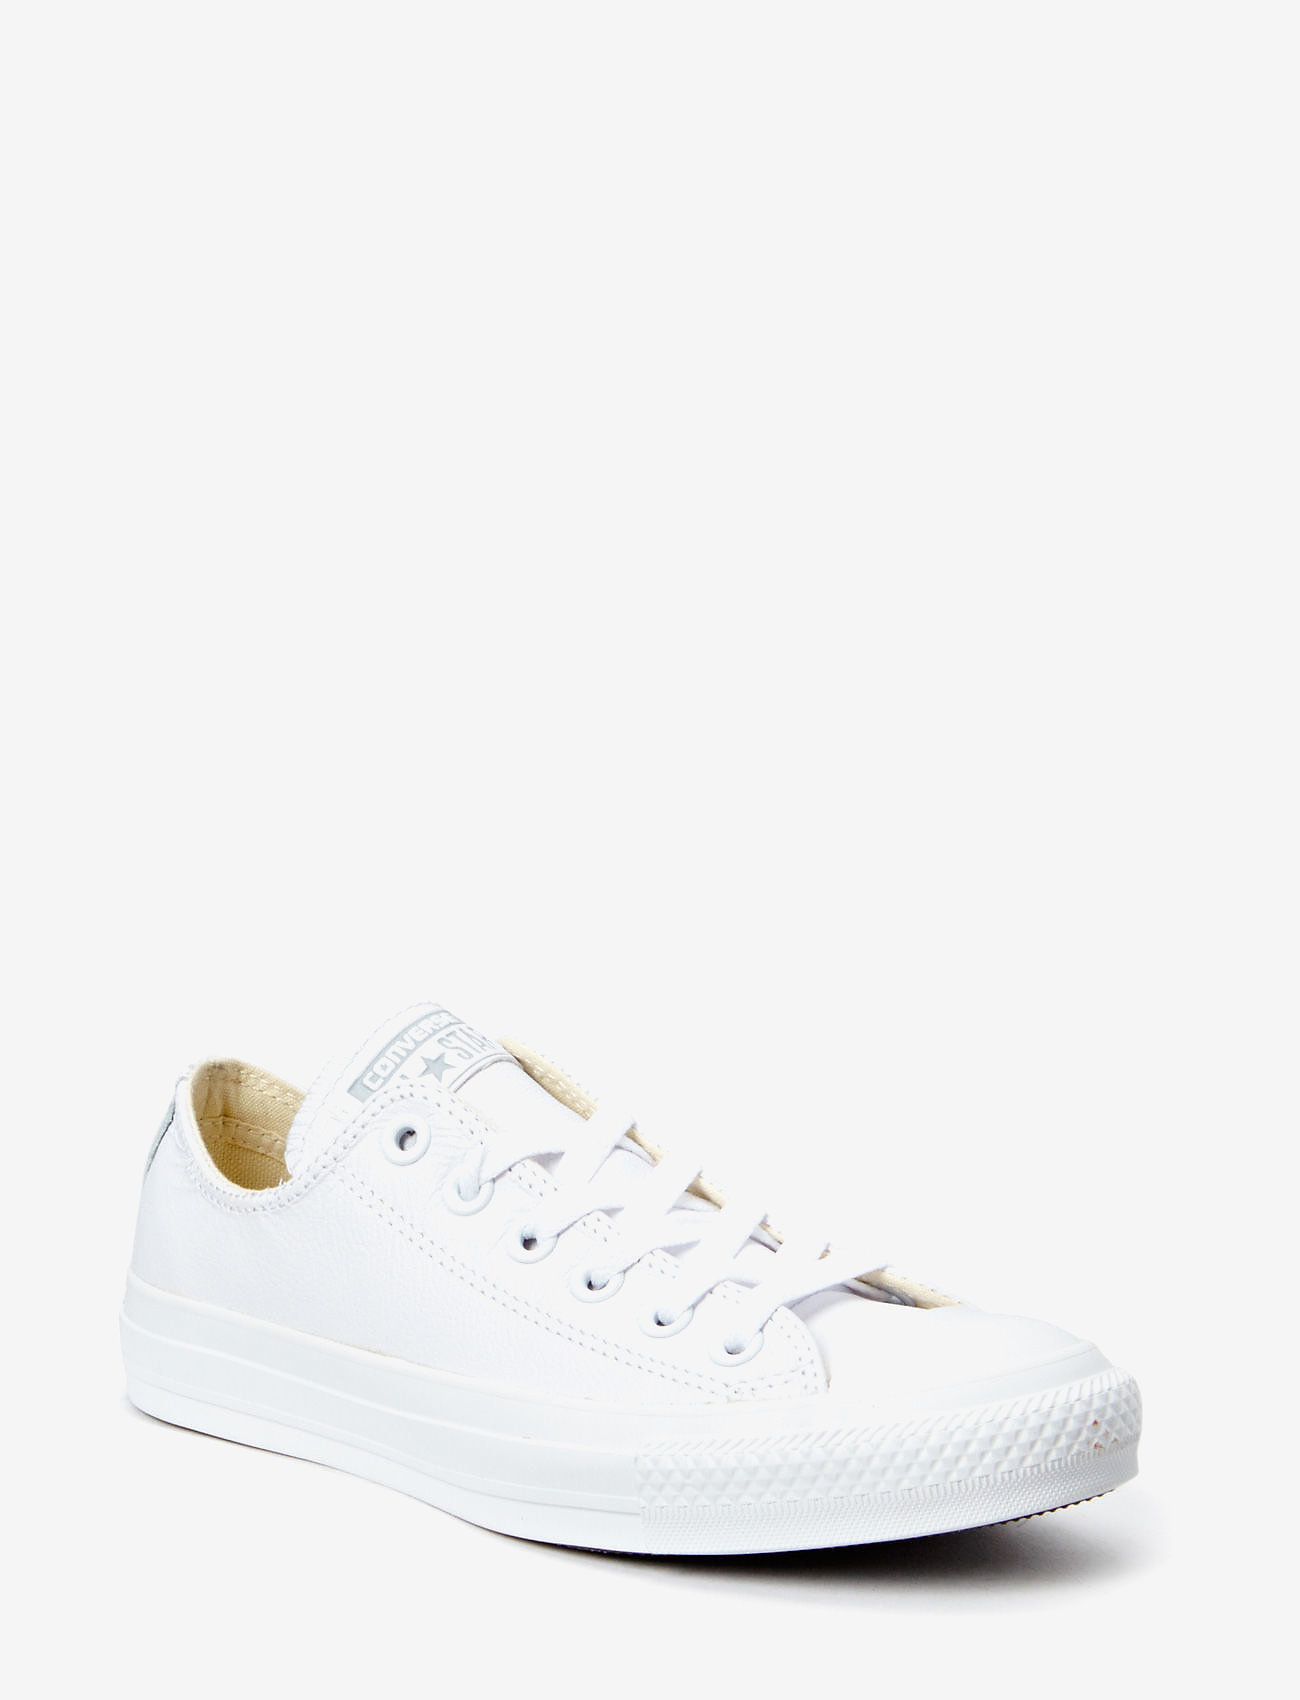 Converse - Chuck Taylor All Star - lave sneakers - white - 0